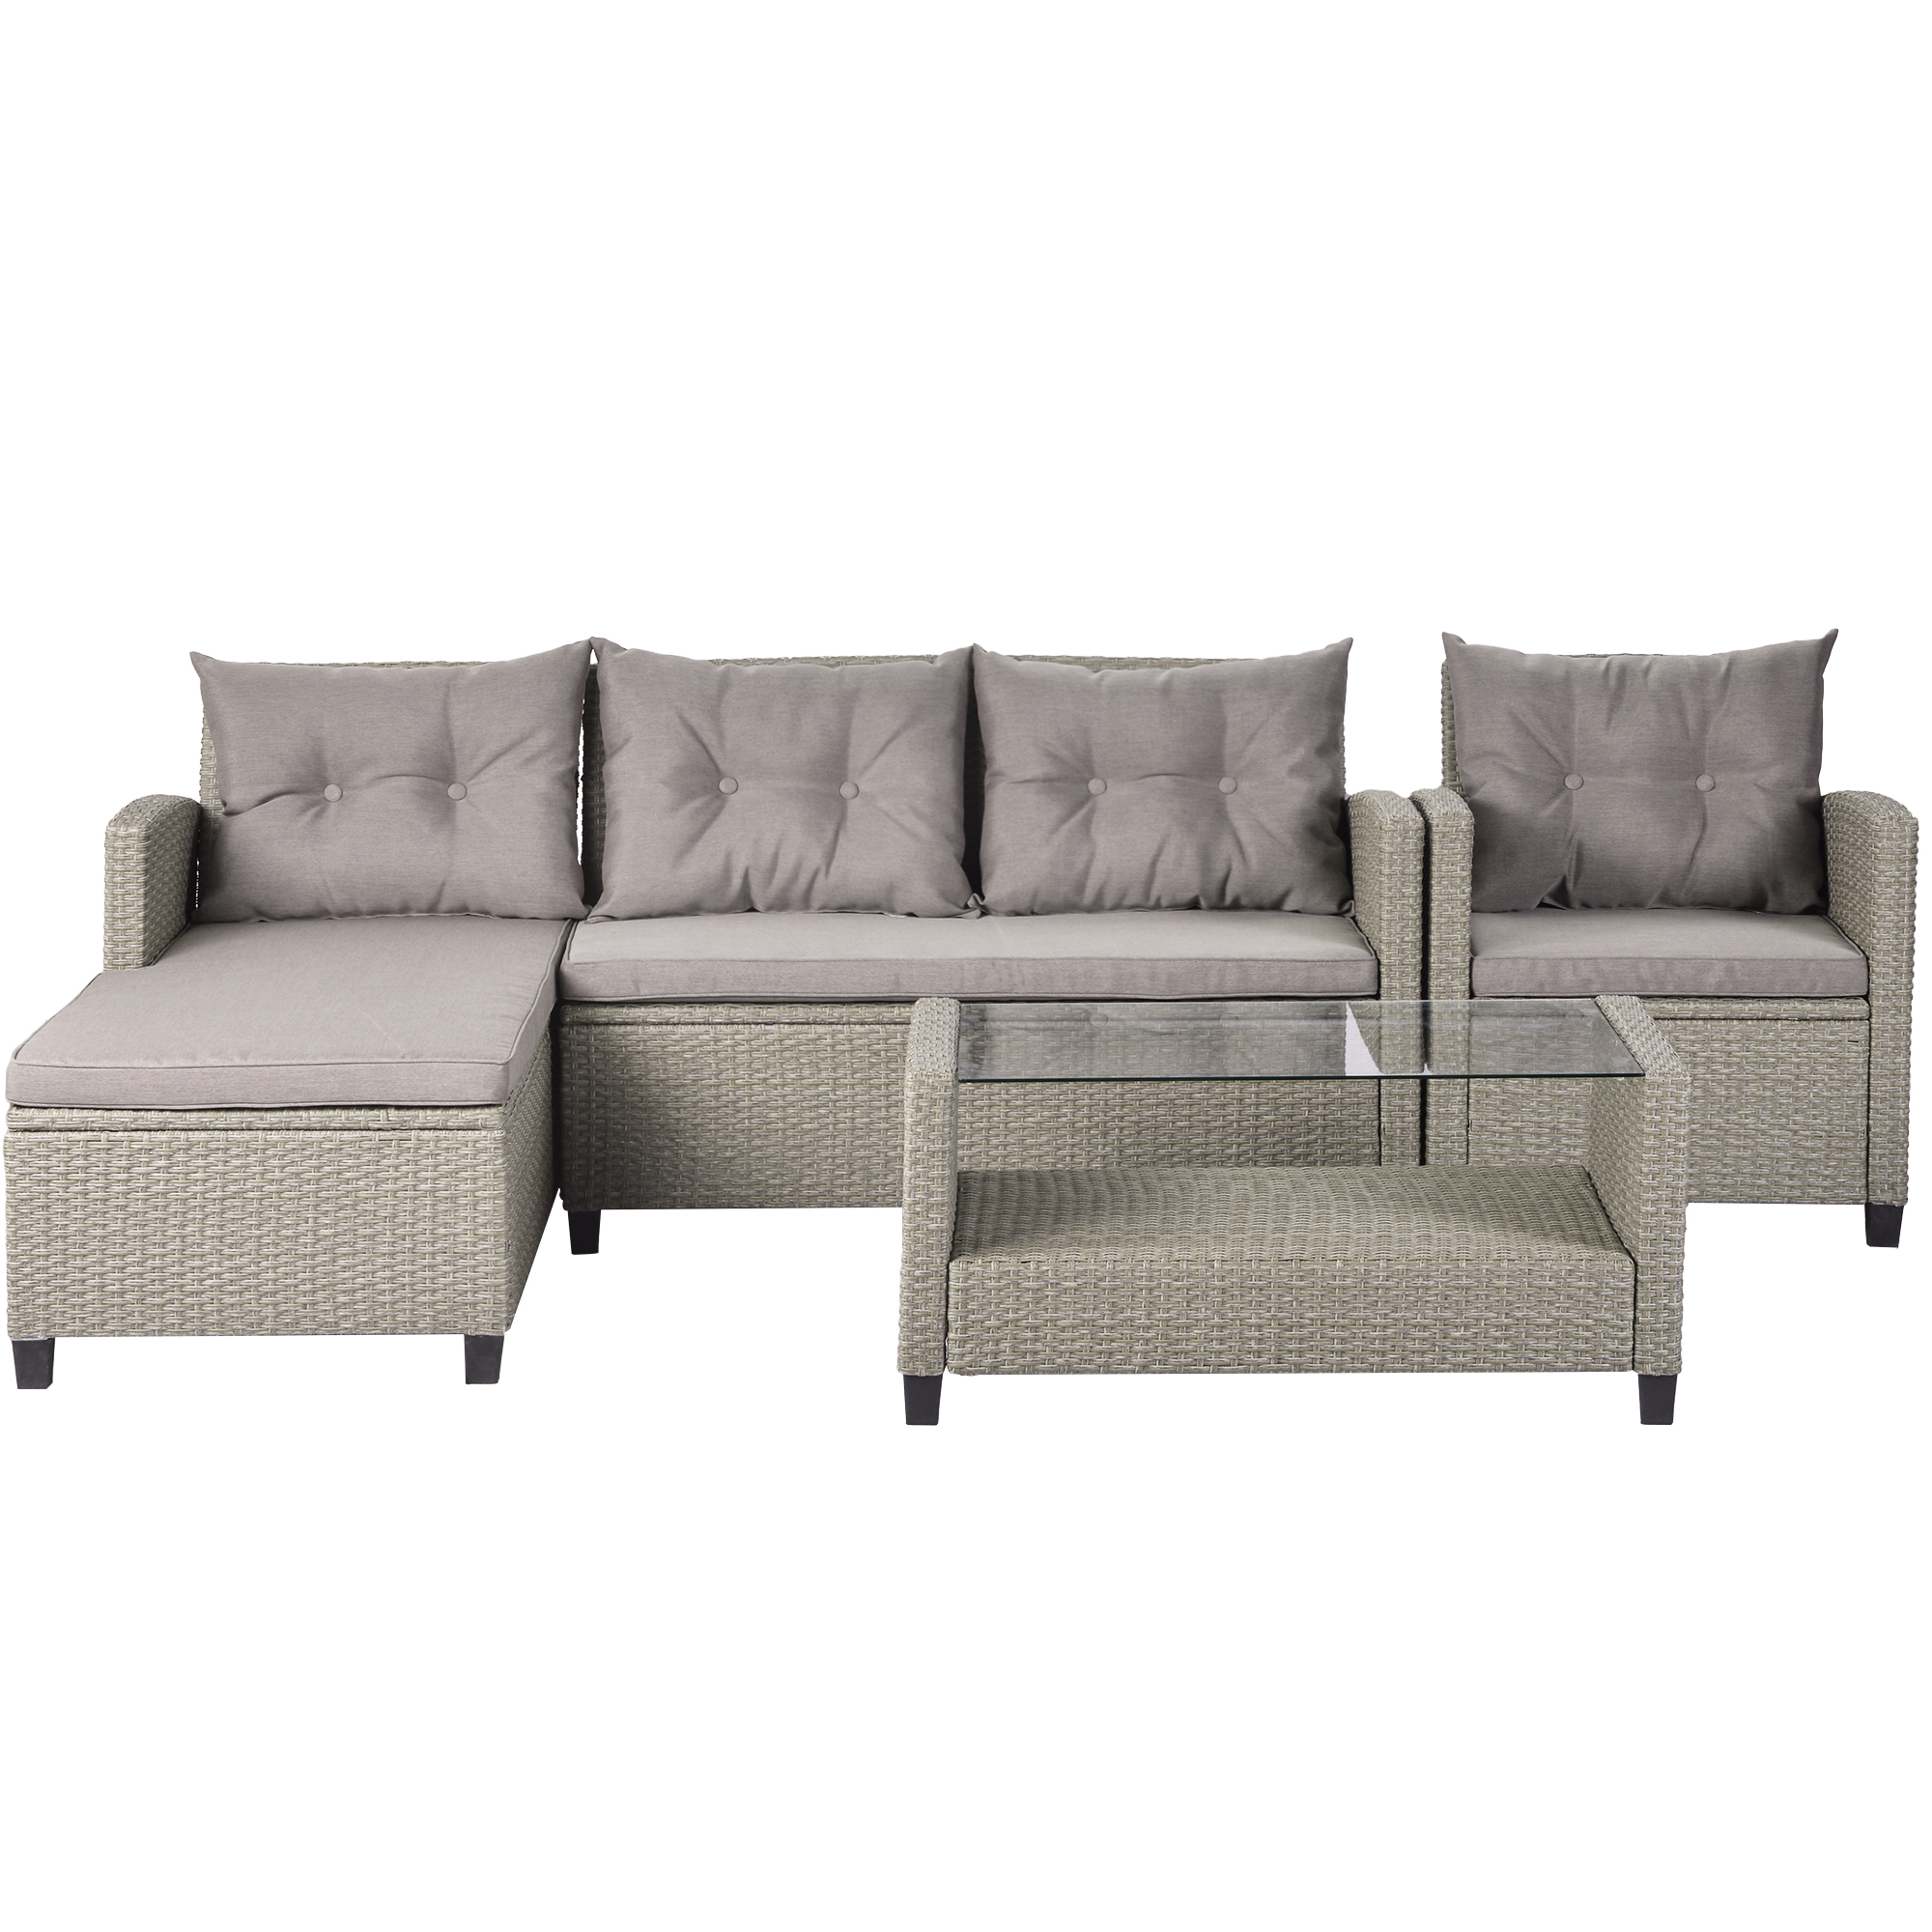 Outdoor, Patio Furniture Sets, 4 Piece Conversation Set Wicker Ratten Sectional Sofa with Seat Cushions(Beige Brown)-CASAINC